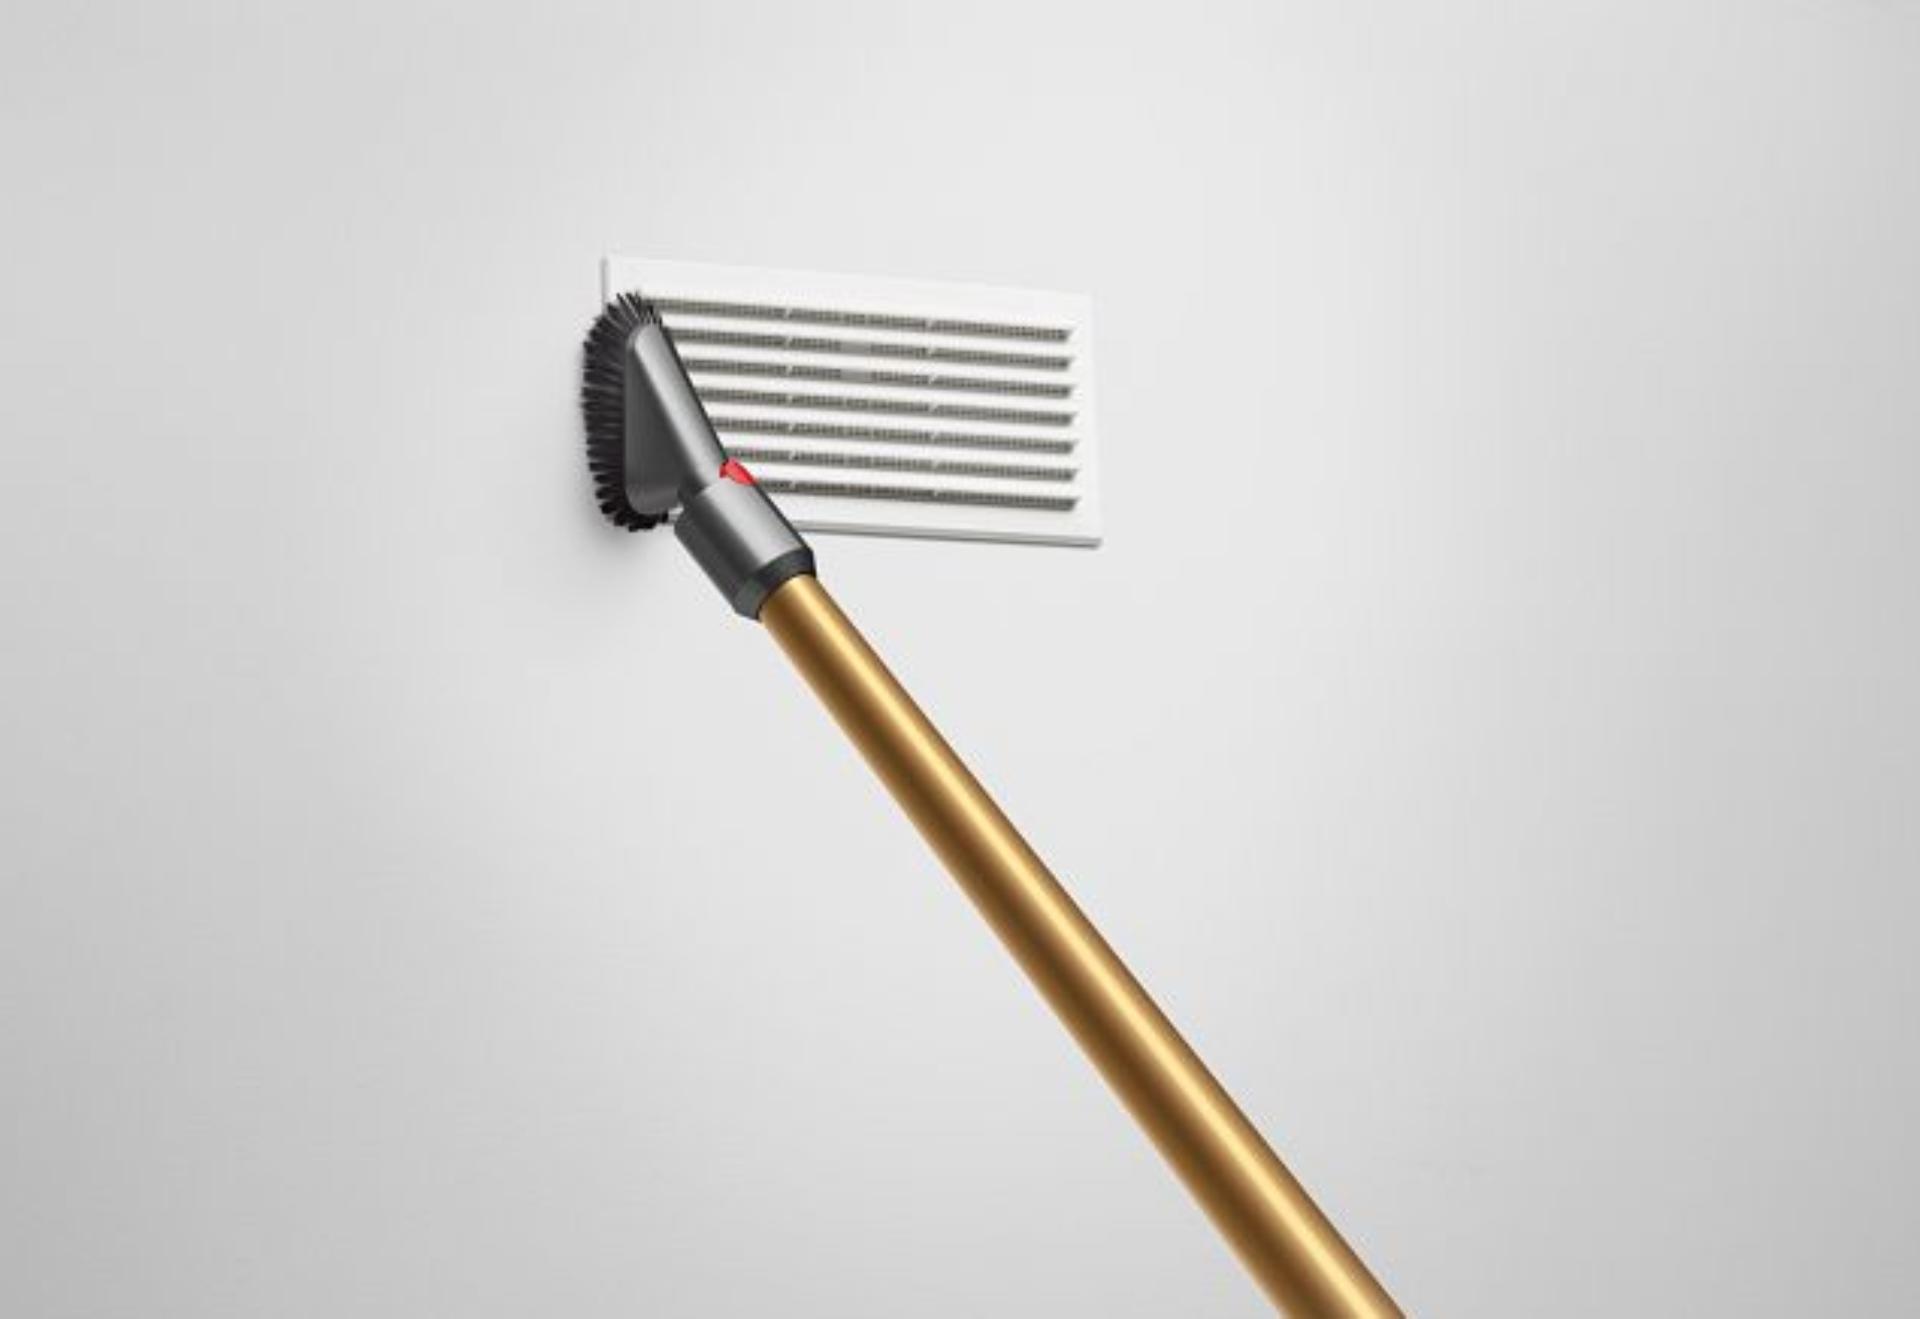 Dyson vacuum being used to clean vent